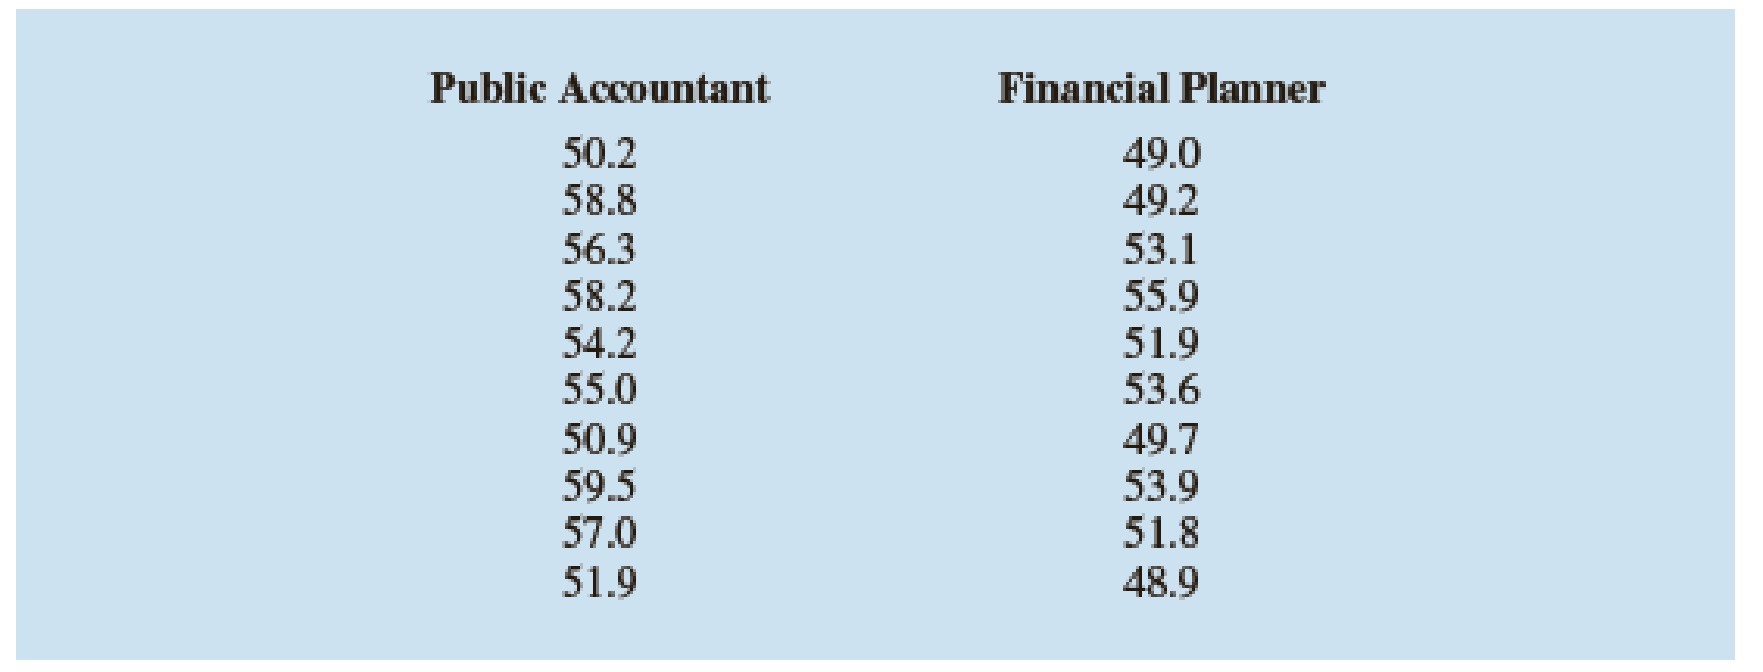 Chapter 18.3, Problem 19E, Samples of starting annual salaries for individuals entering the public accounting and financial 